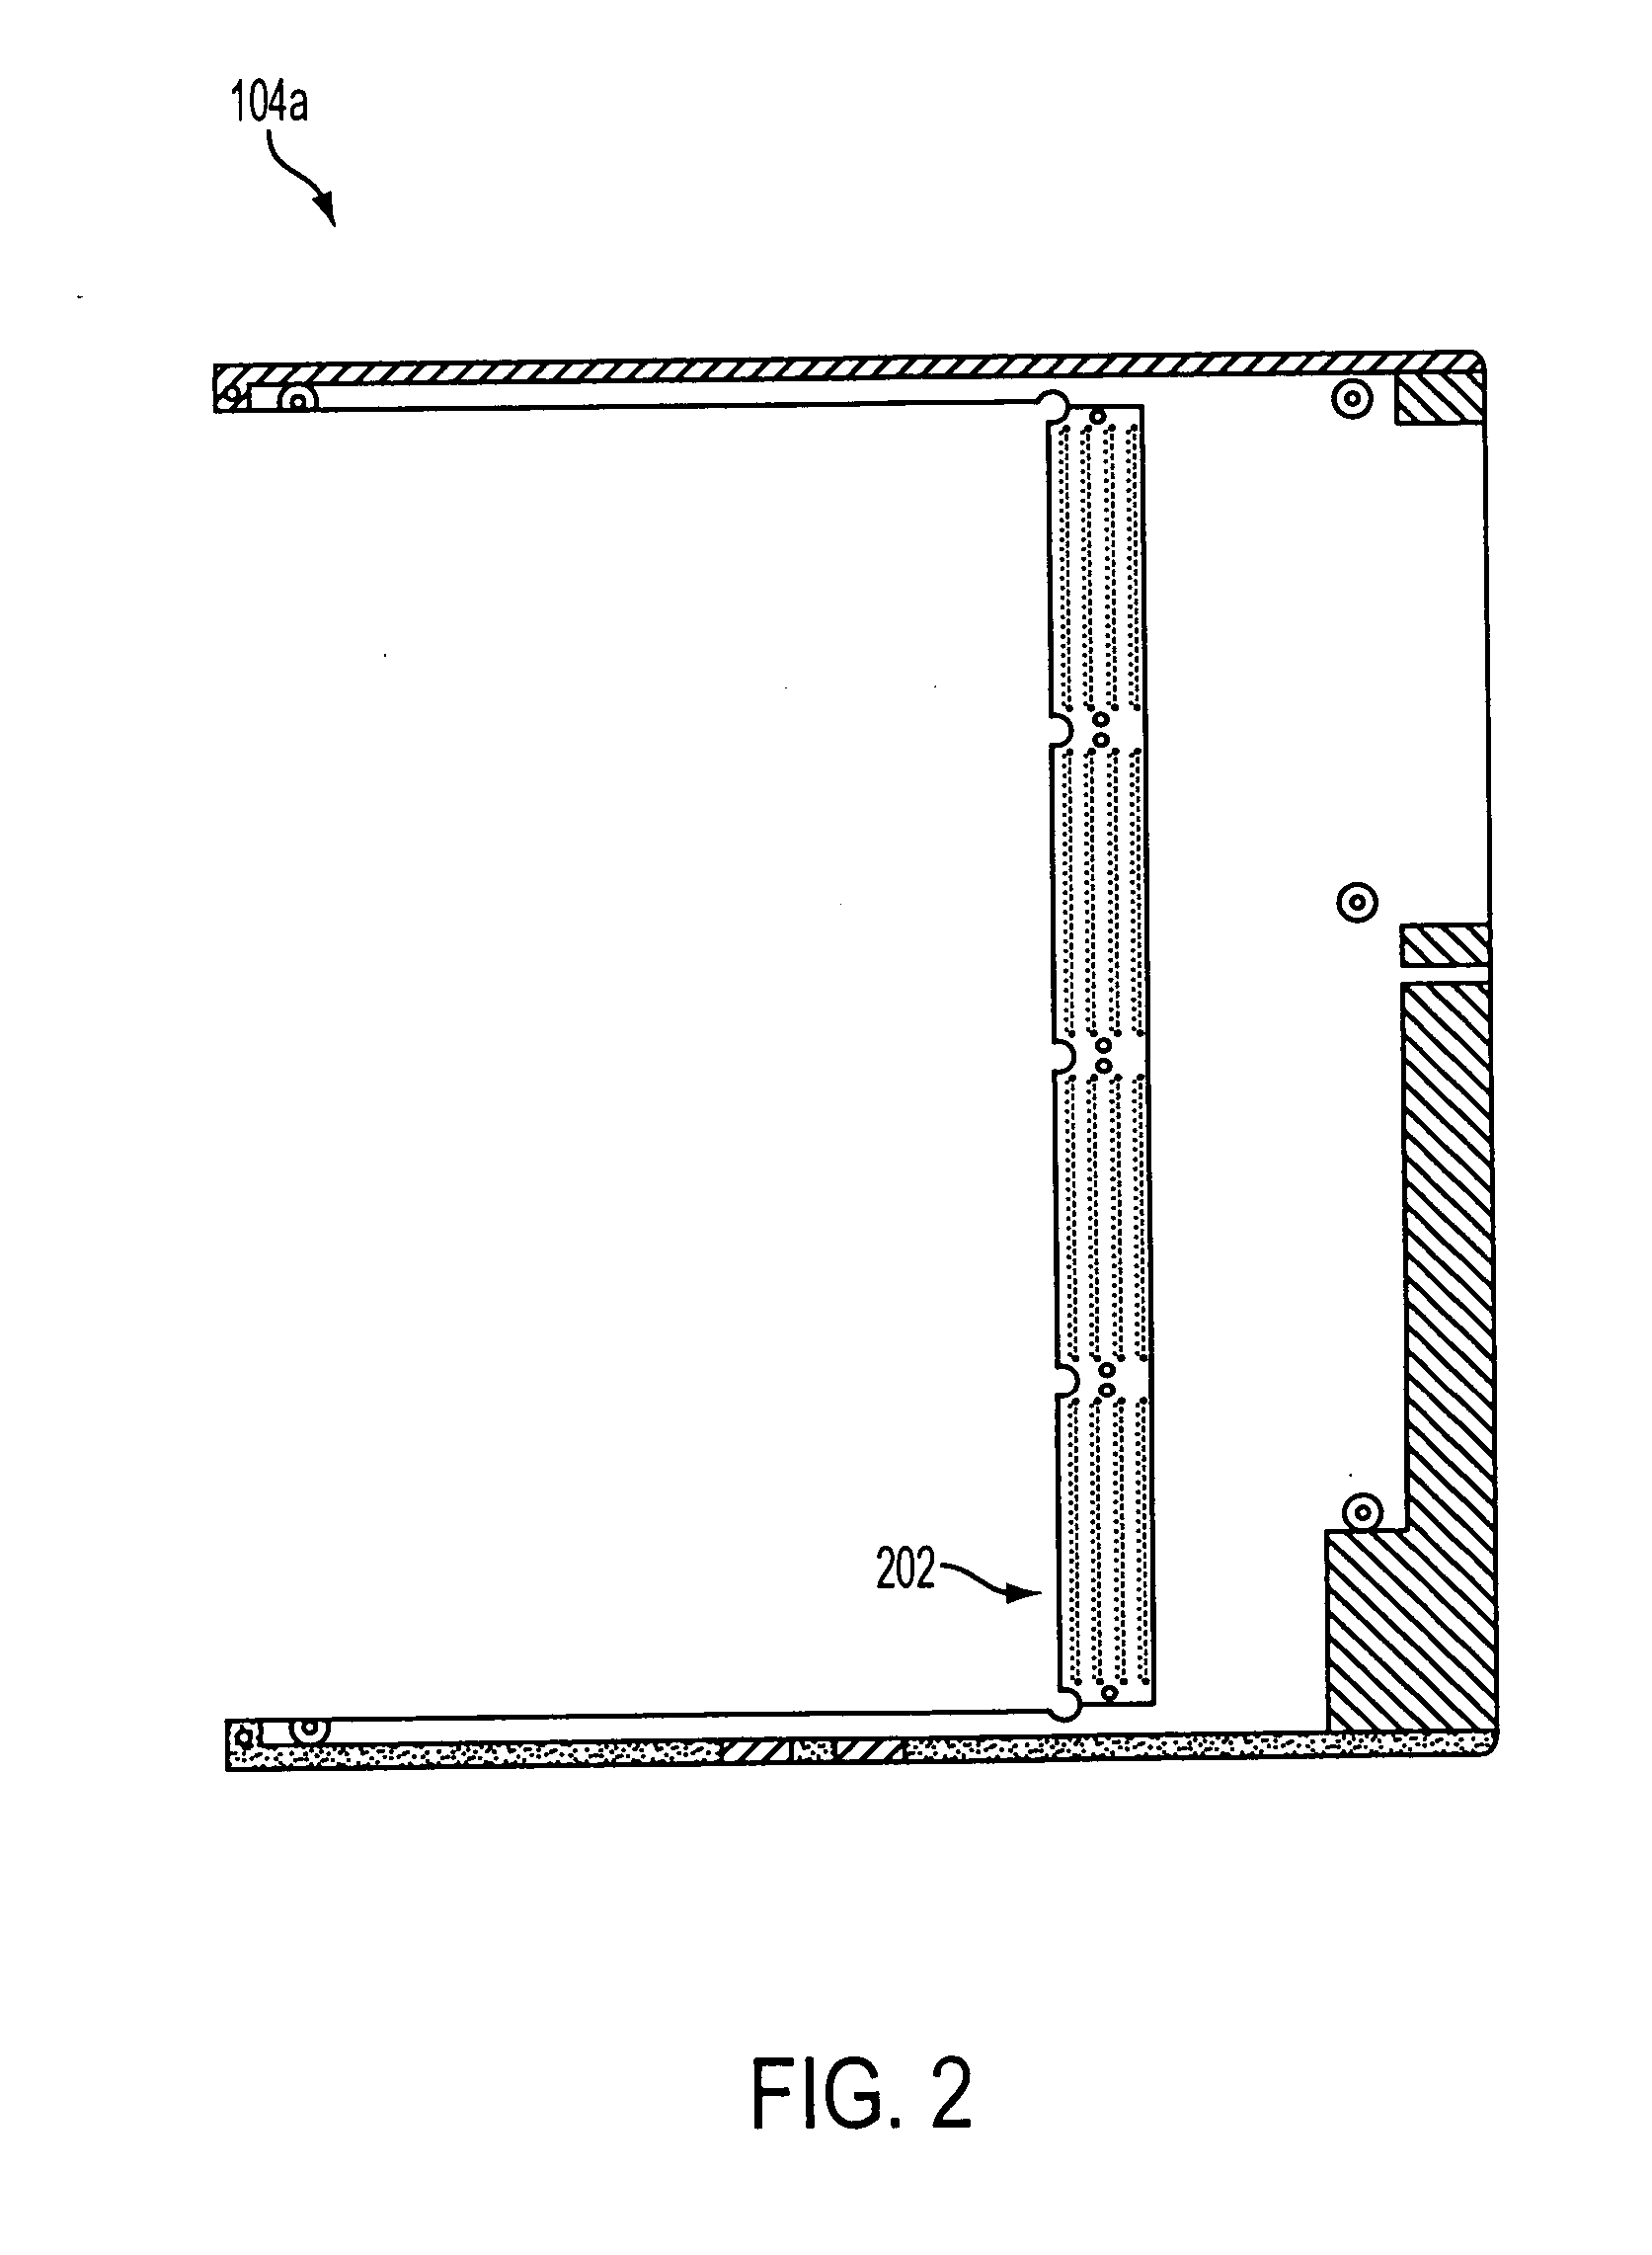 System and method for Advanced Mezzanine Card connection